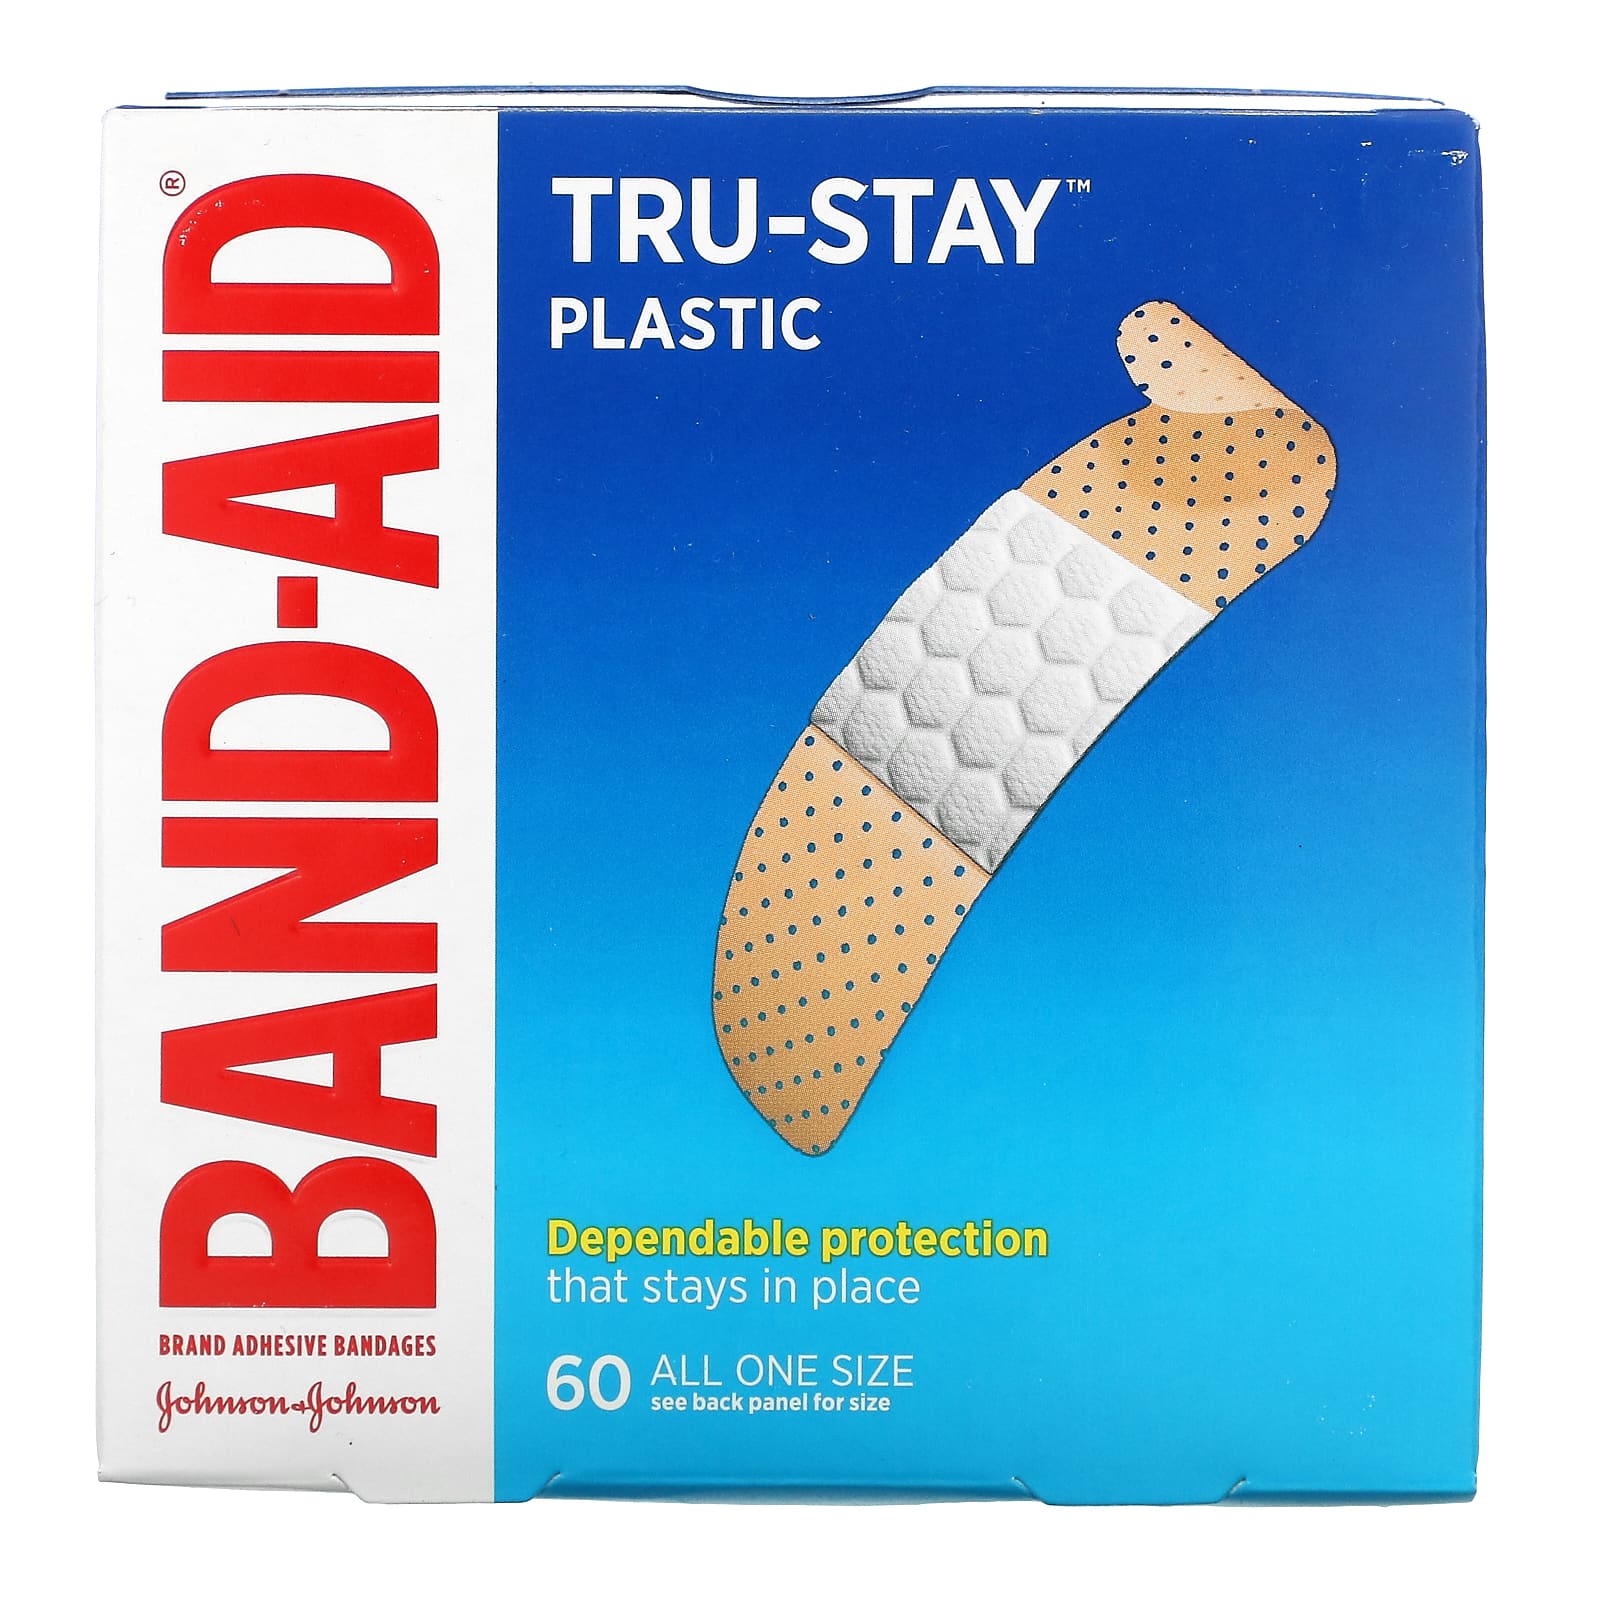 Band Aid Adhesive Bandages Plastic Strips 60 Bandages 20pcs lot cartoon animal pattern band aid hemostasis adhesive bandages first aid emergency kit wound plaster patches for kids